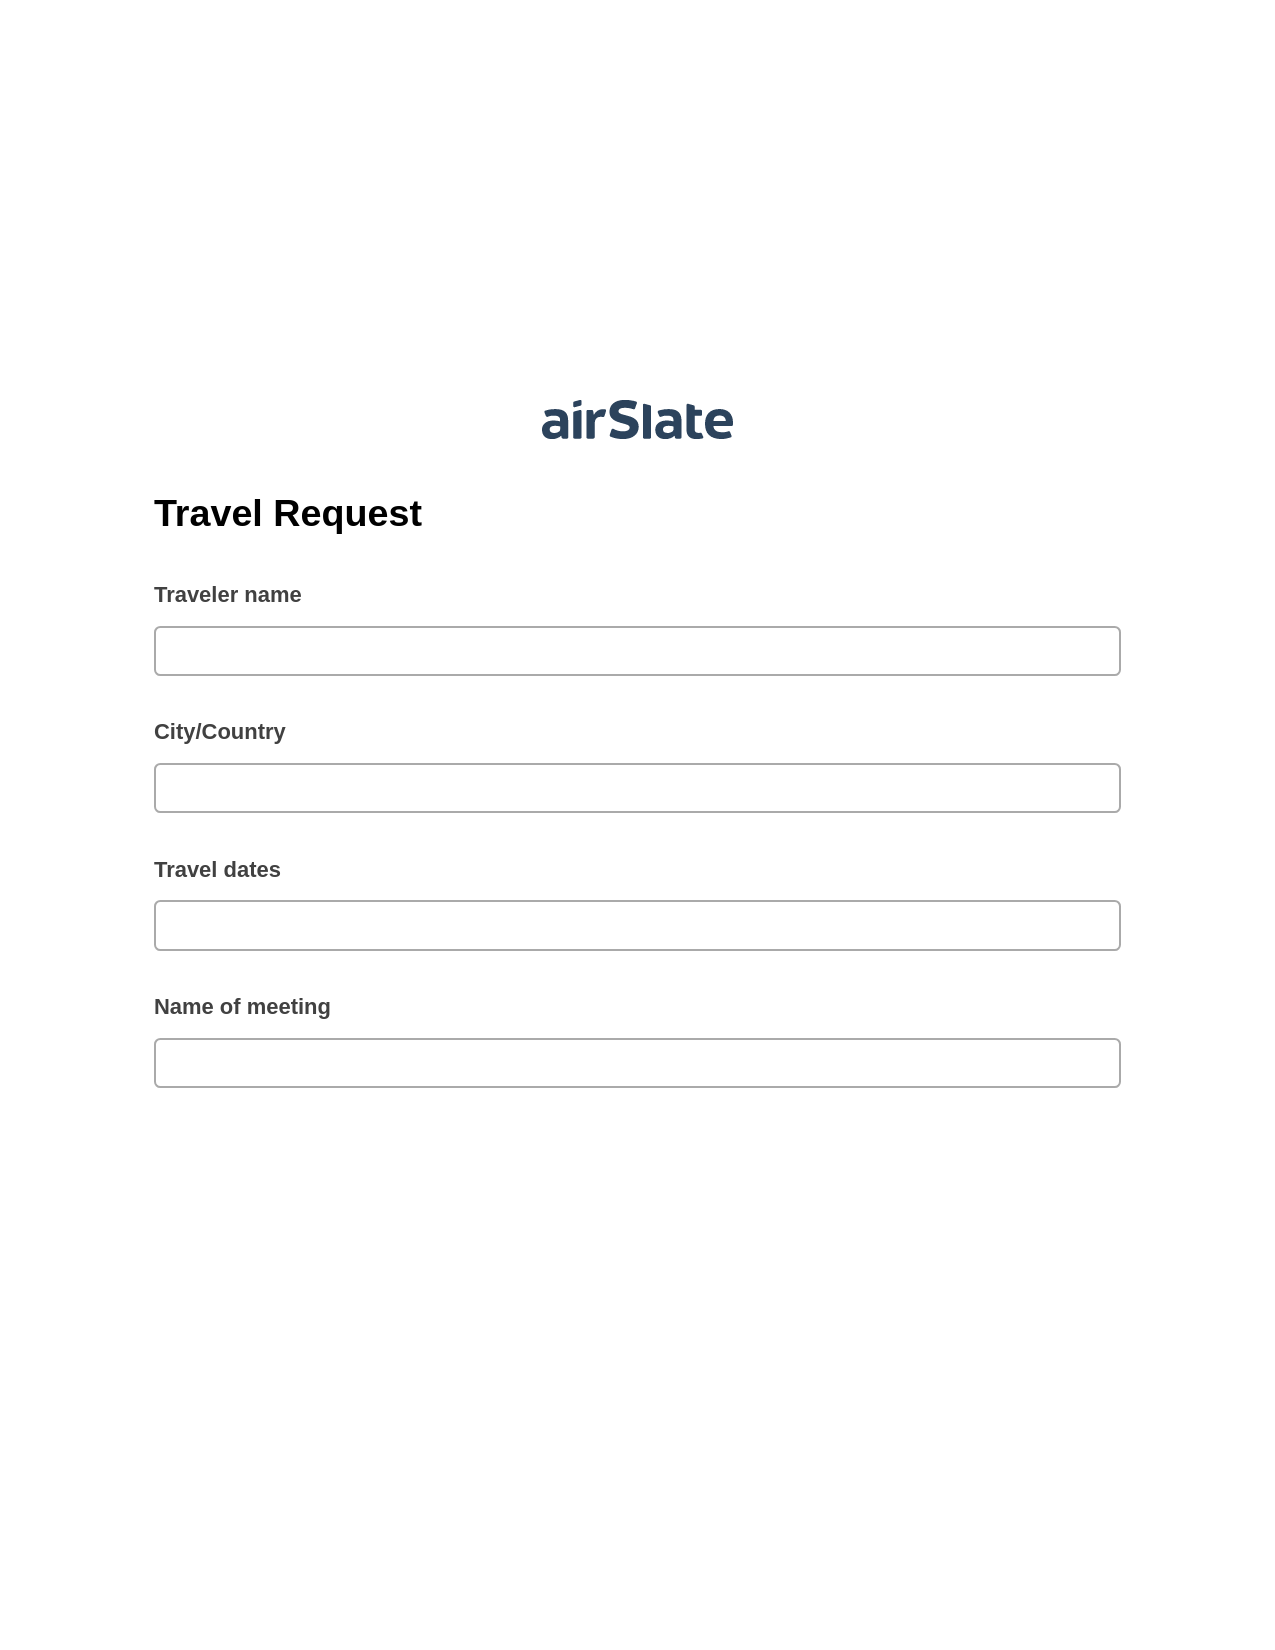 Travel Request Pre-fill Dropdowns from CSV File Bot, Unassign Role Bot, Email Notification Postfinish Bot